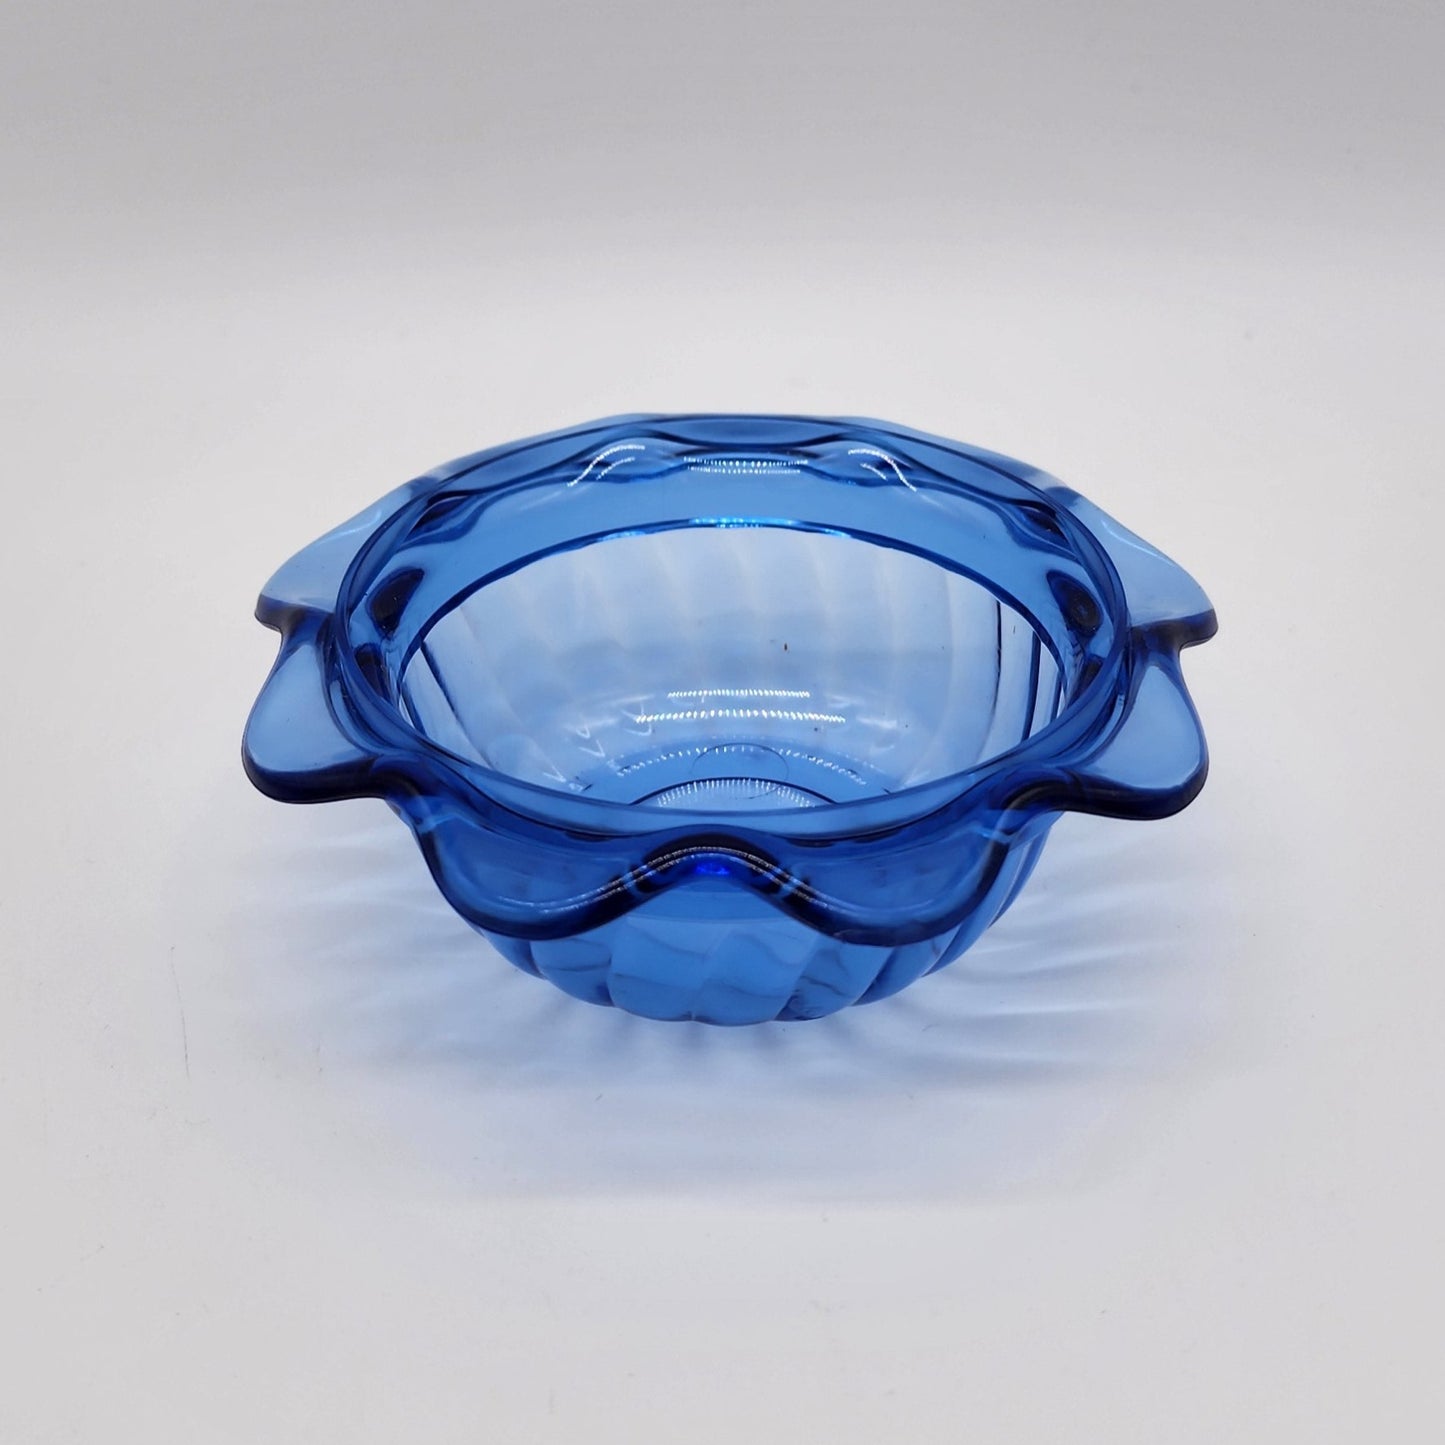 Blue plastic cup with scalloped edges